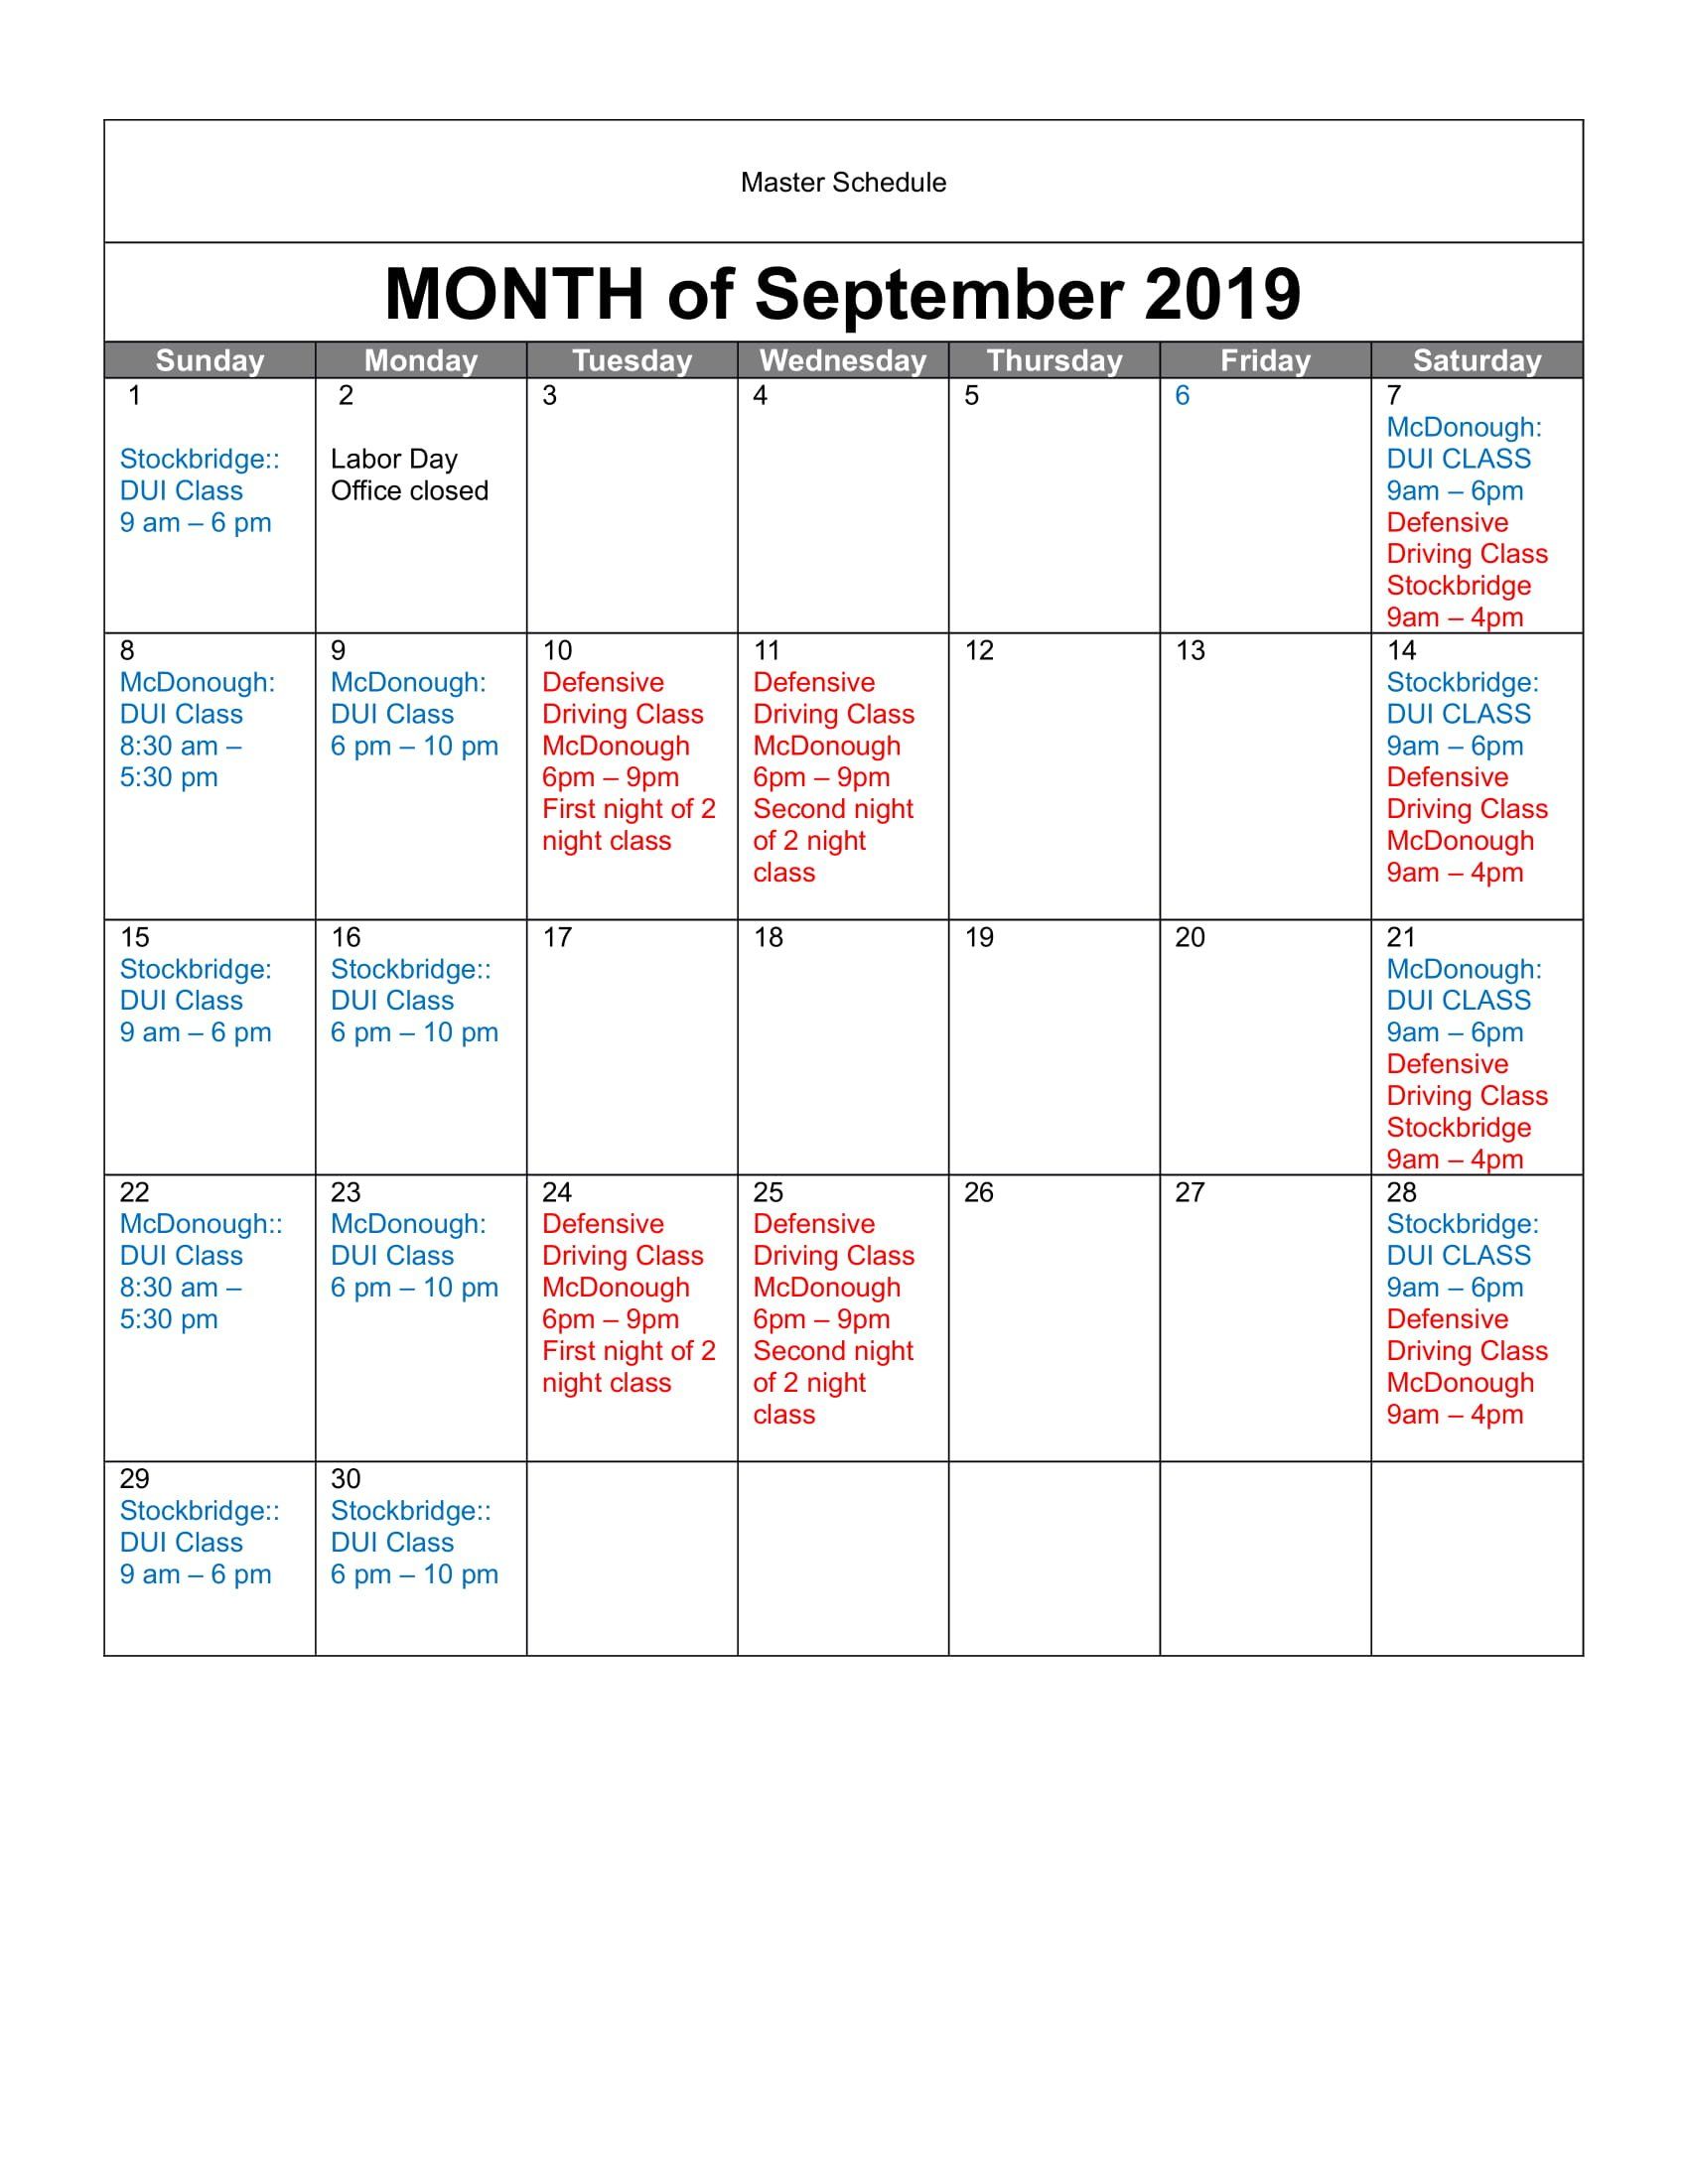 MONTH of September Schedule 2019